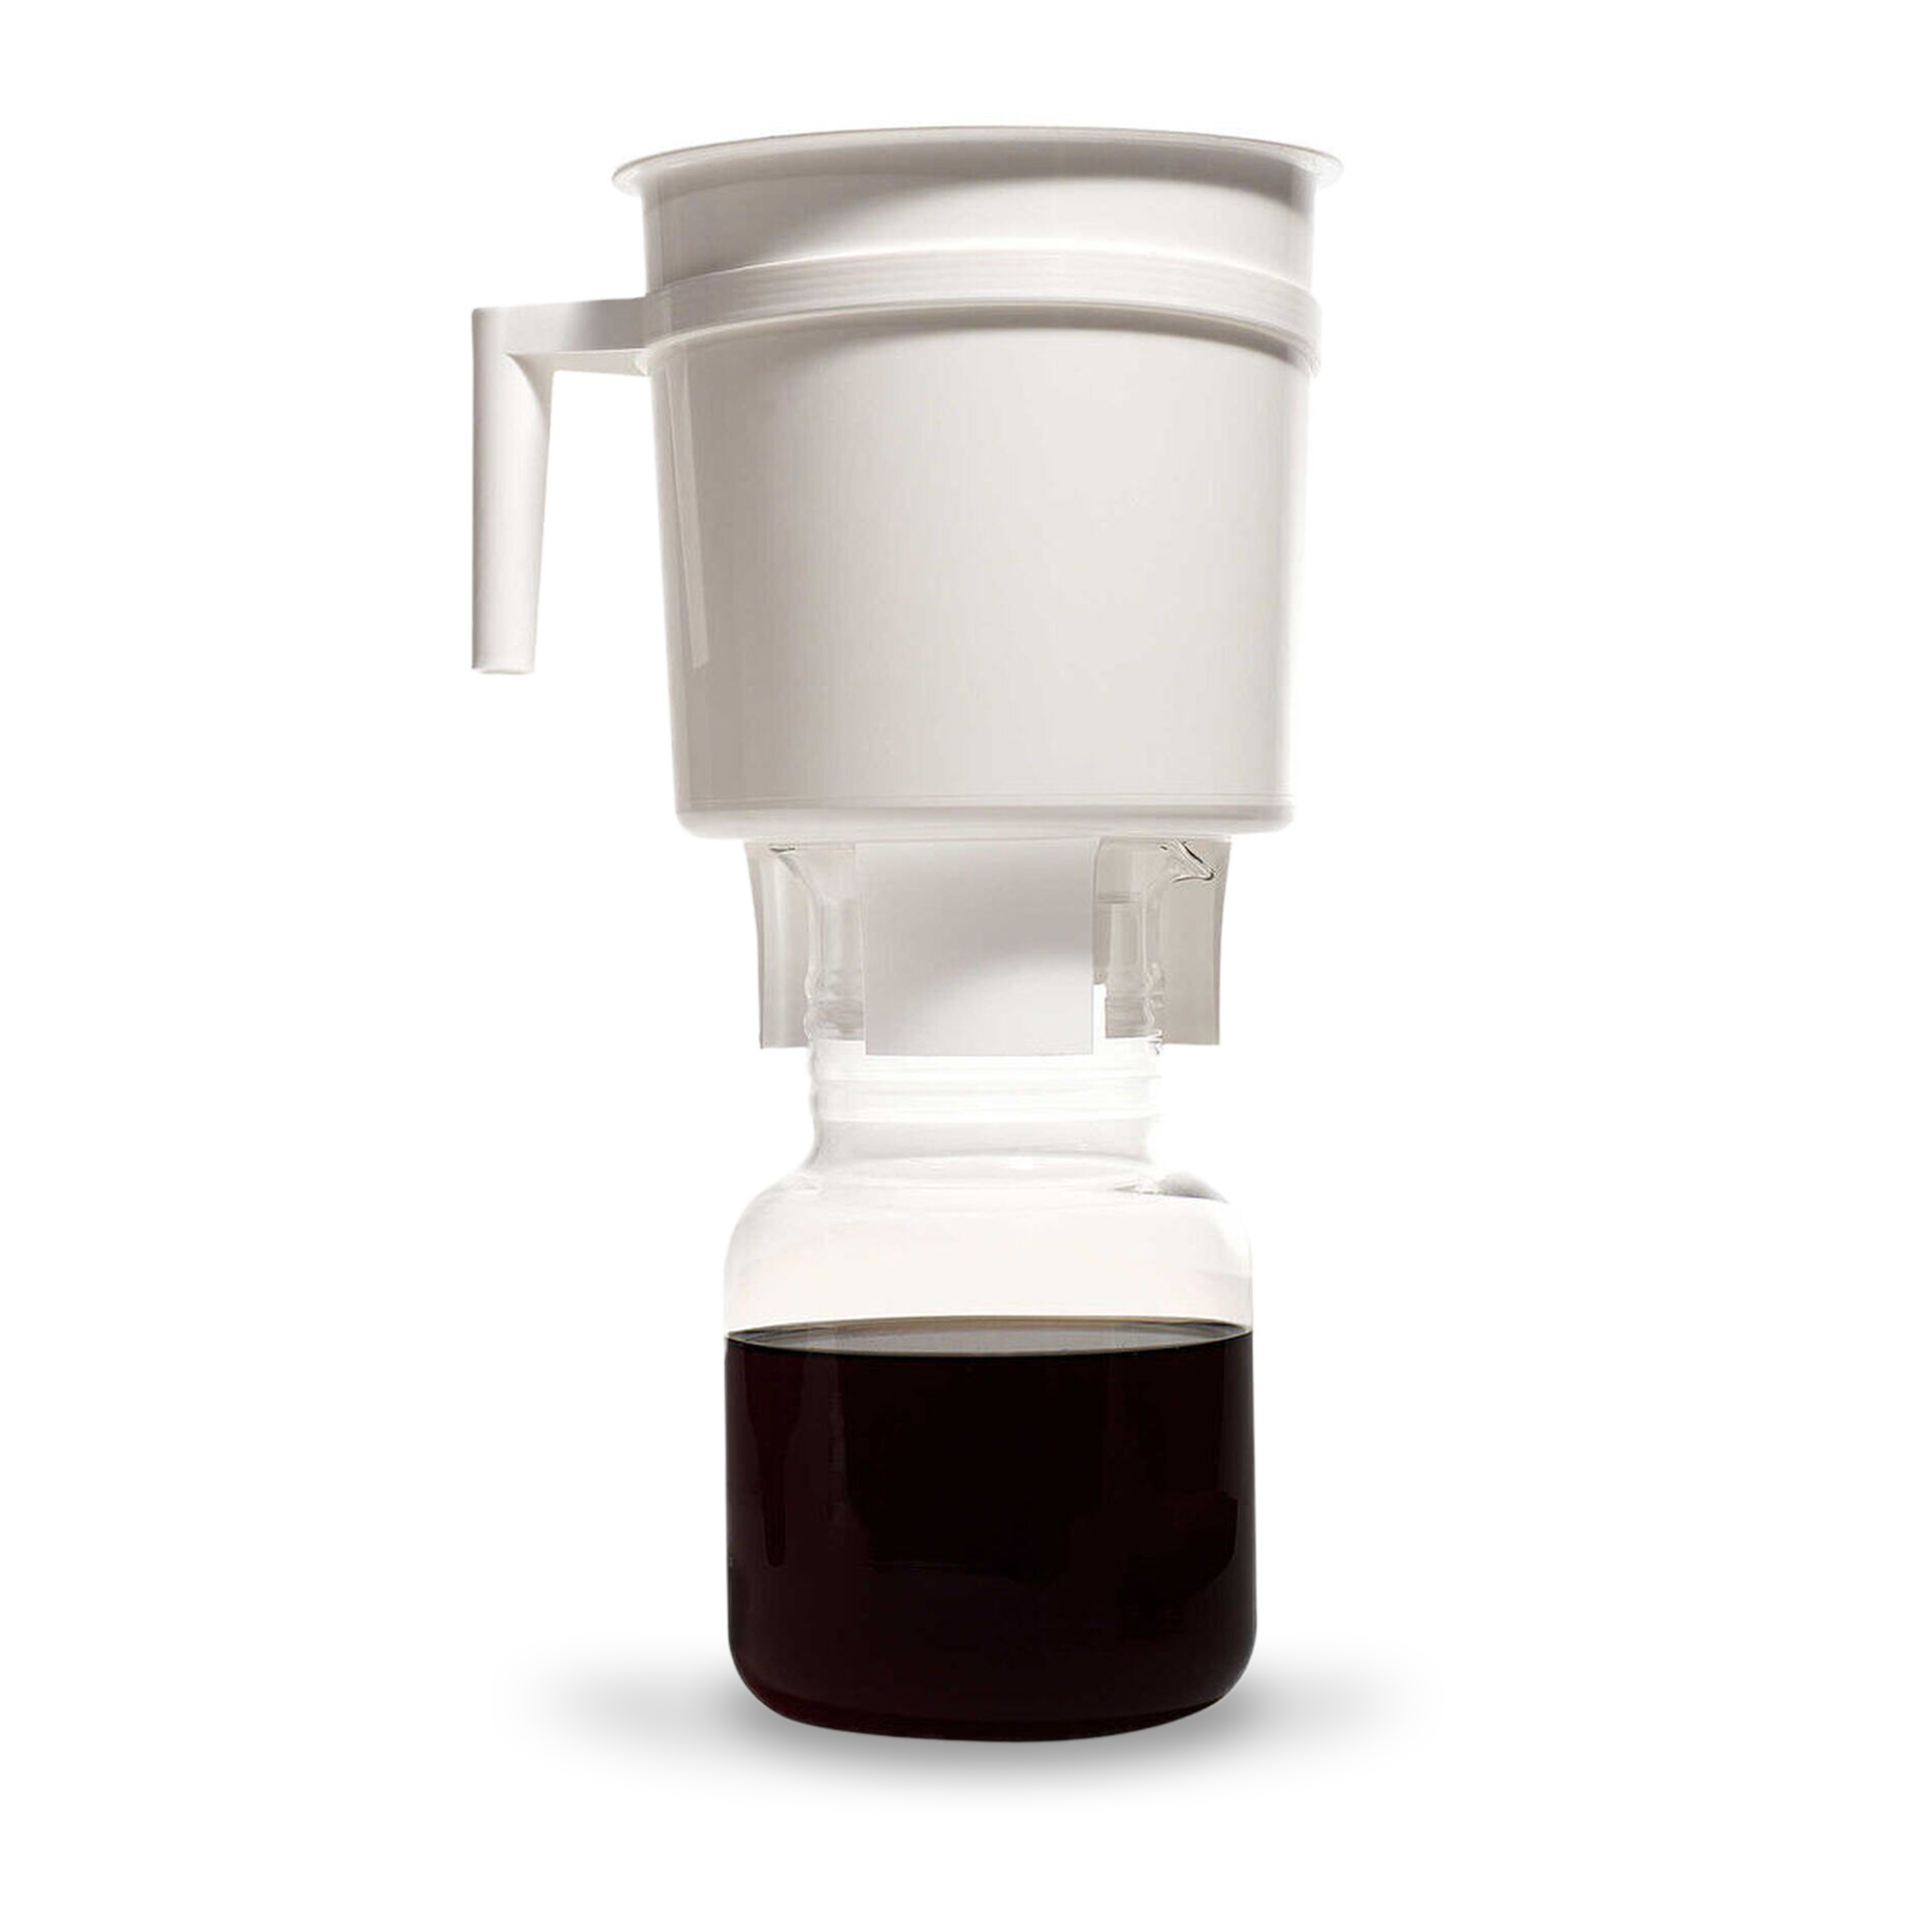 Toddy Cold Brew System - Iced Coffee Maker - Orleans Coffee